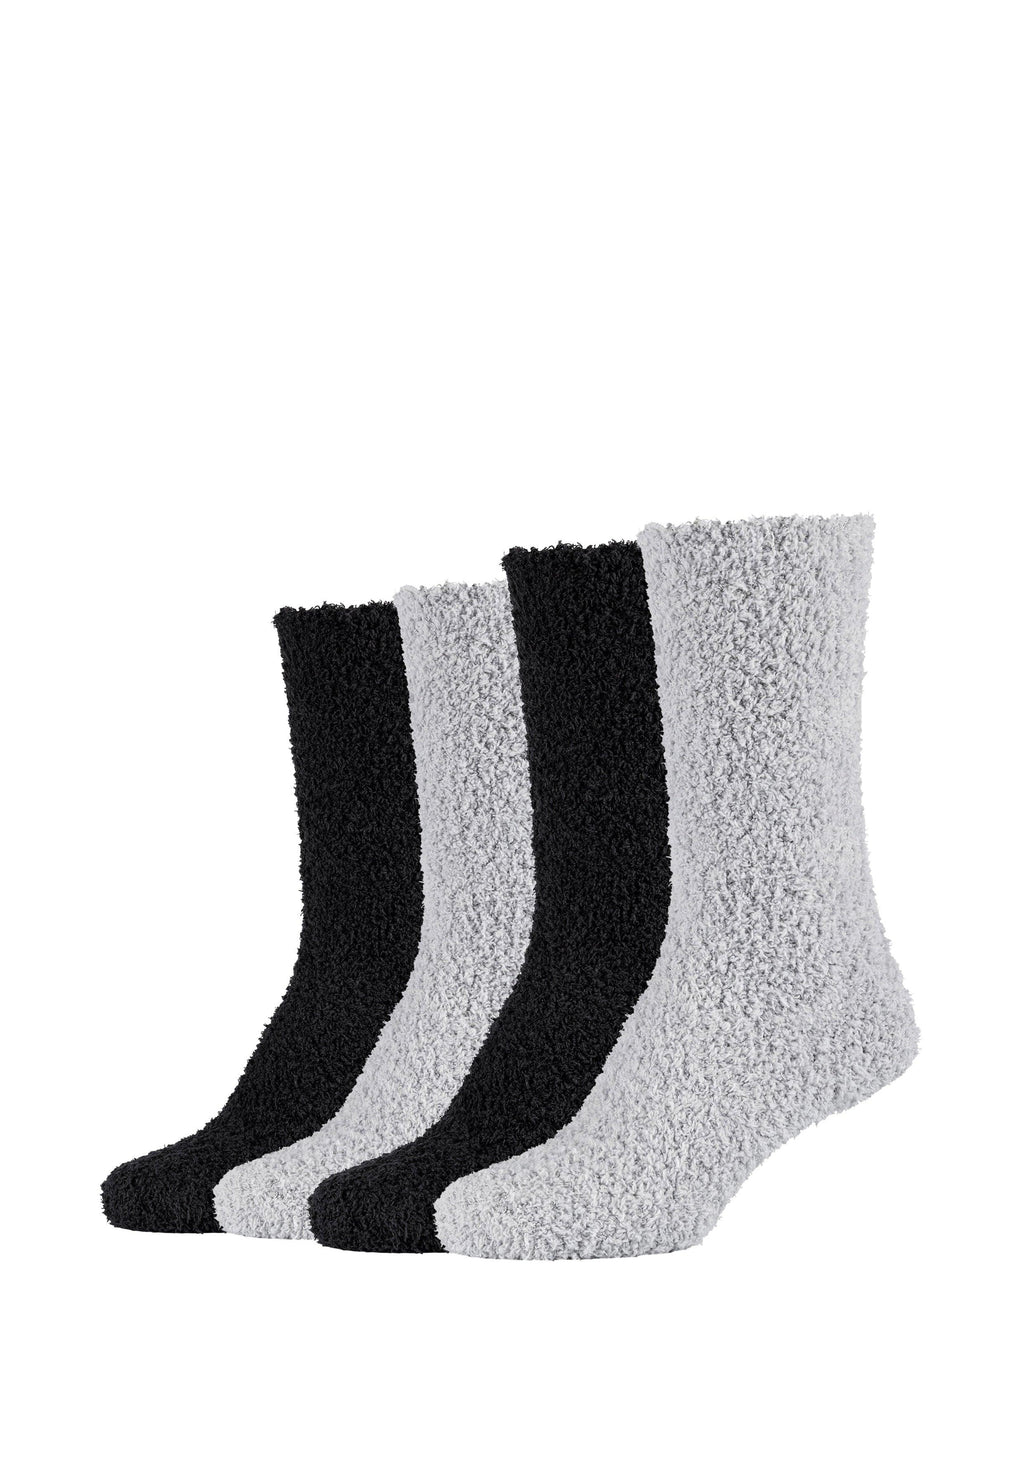 Socken mit Recycled – Cosy ONSKINERY Pack 4er Polyester